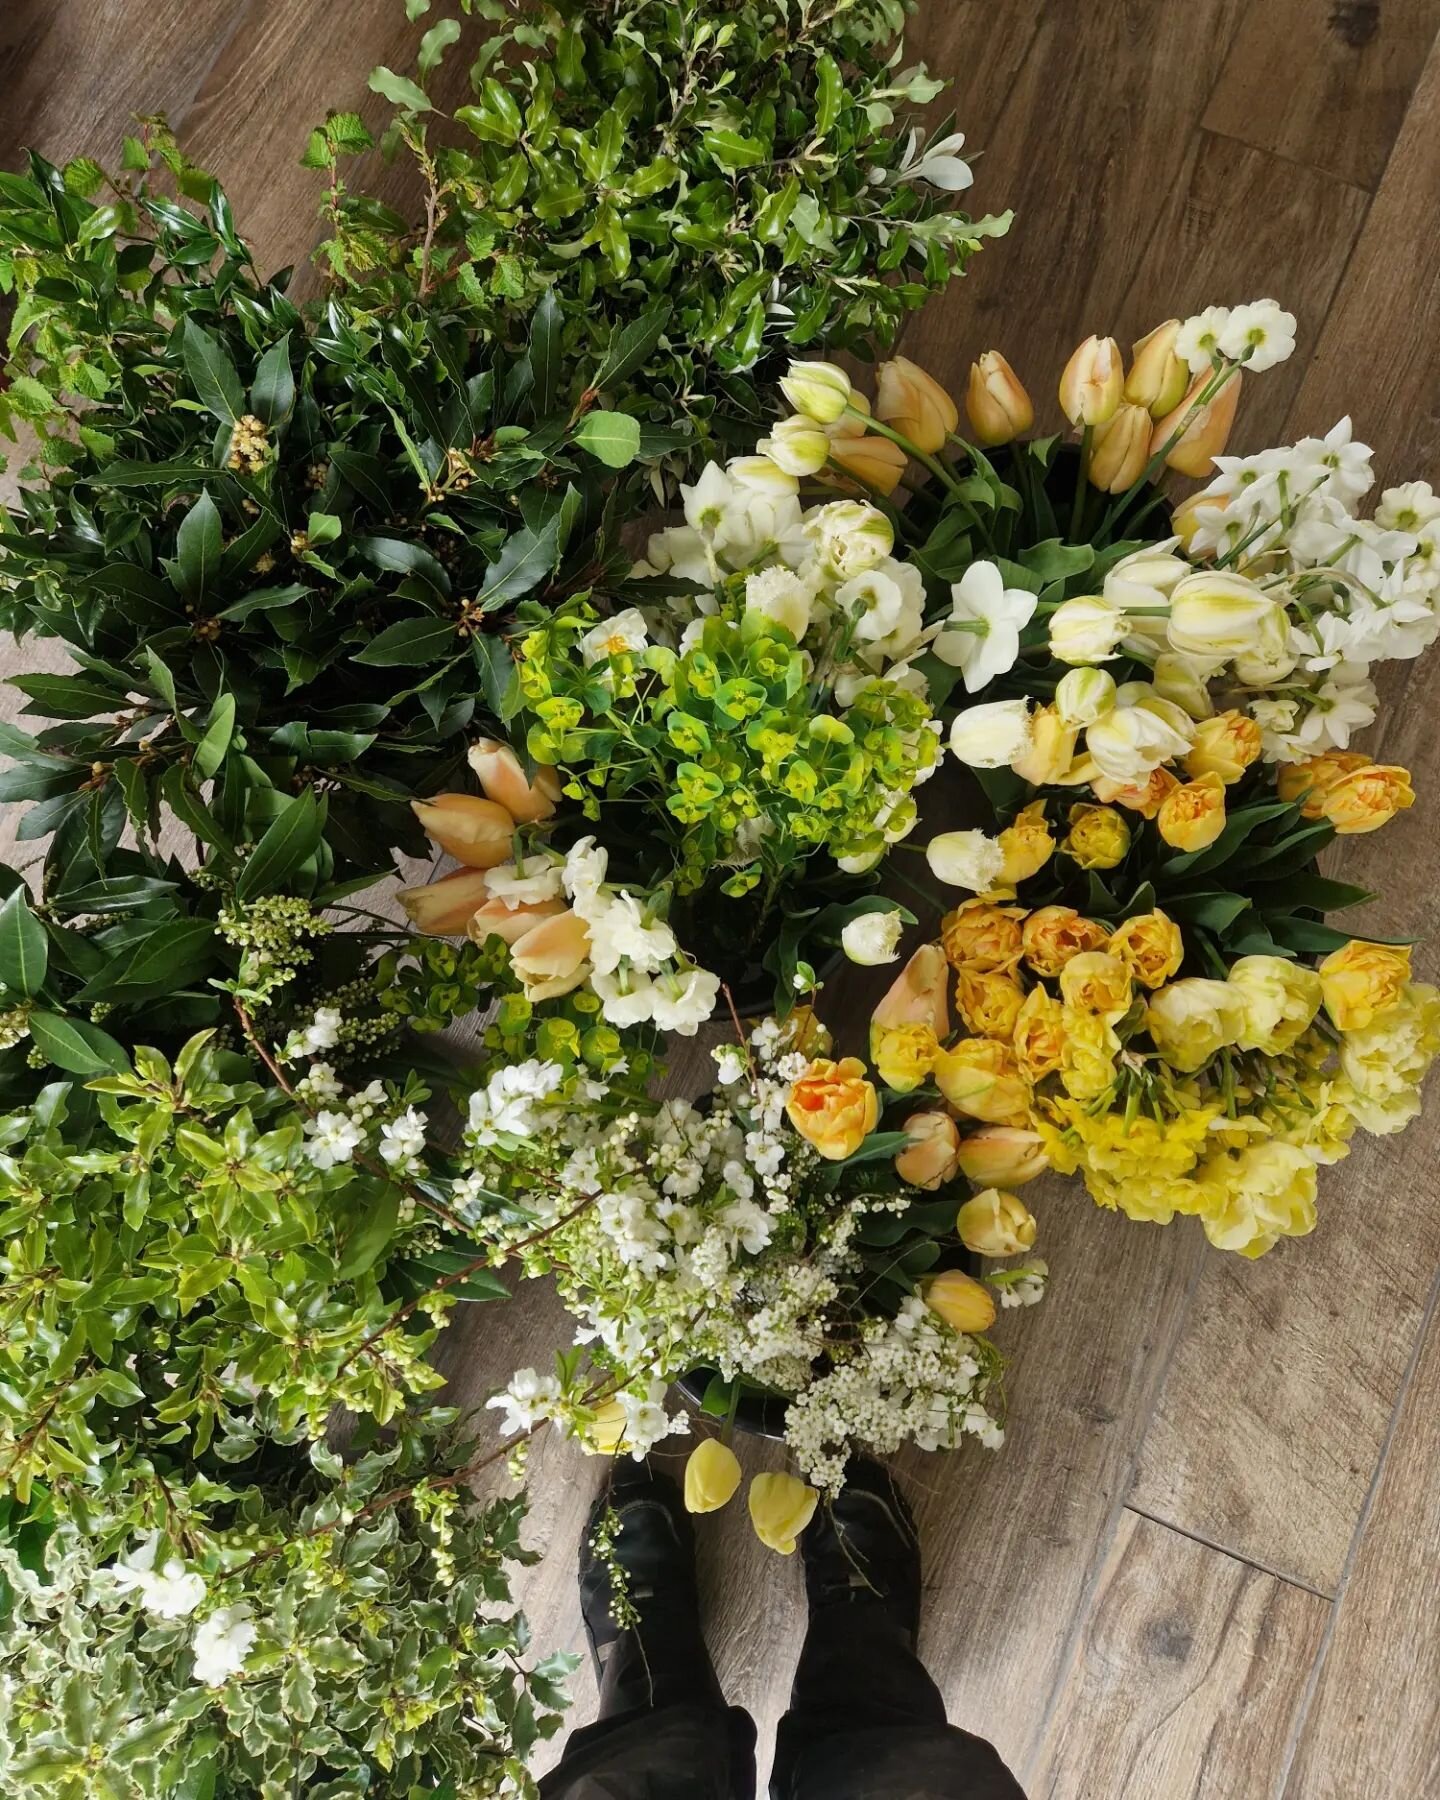 One of today's orders cut for a DIY wedding. A beautiful mix of whites, yellows, and greens....check out that double tulip - a great spring substitute for any peony lovers 🥰

#springflowers #spring #flowerfarm #flowersfordays #fromwhereistand #mysim